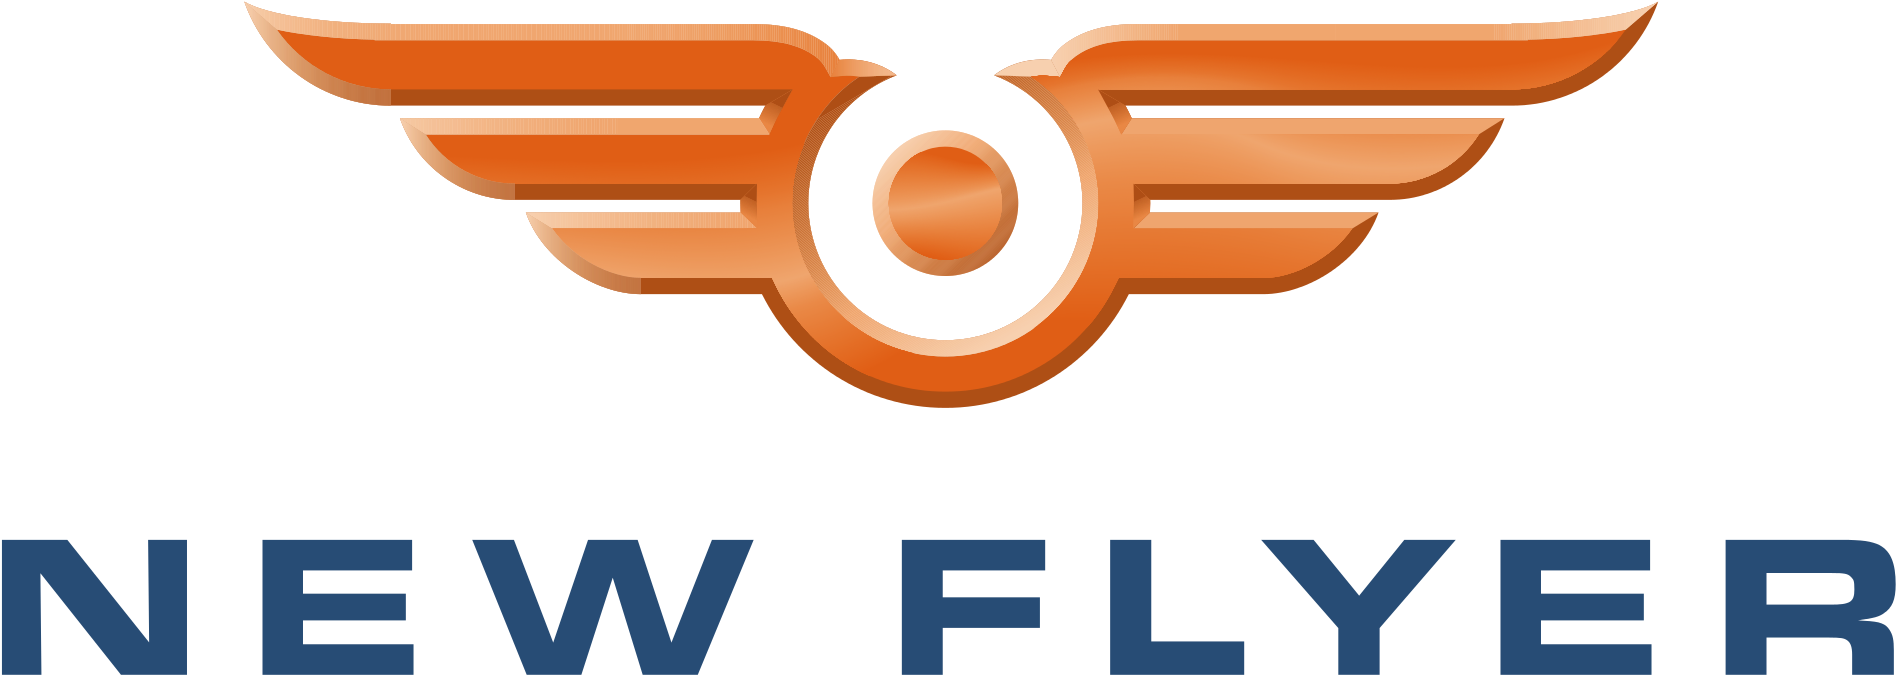 Explore Flyers And More - New Flyer Bus Logo (1920x696)